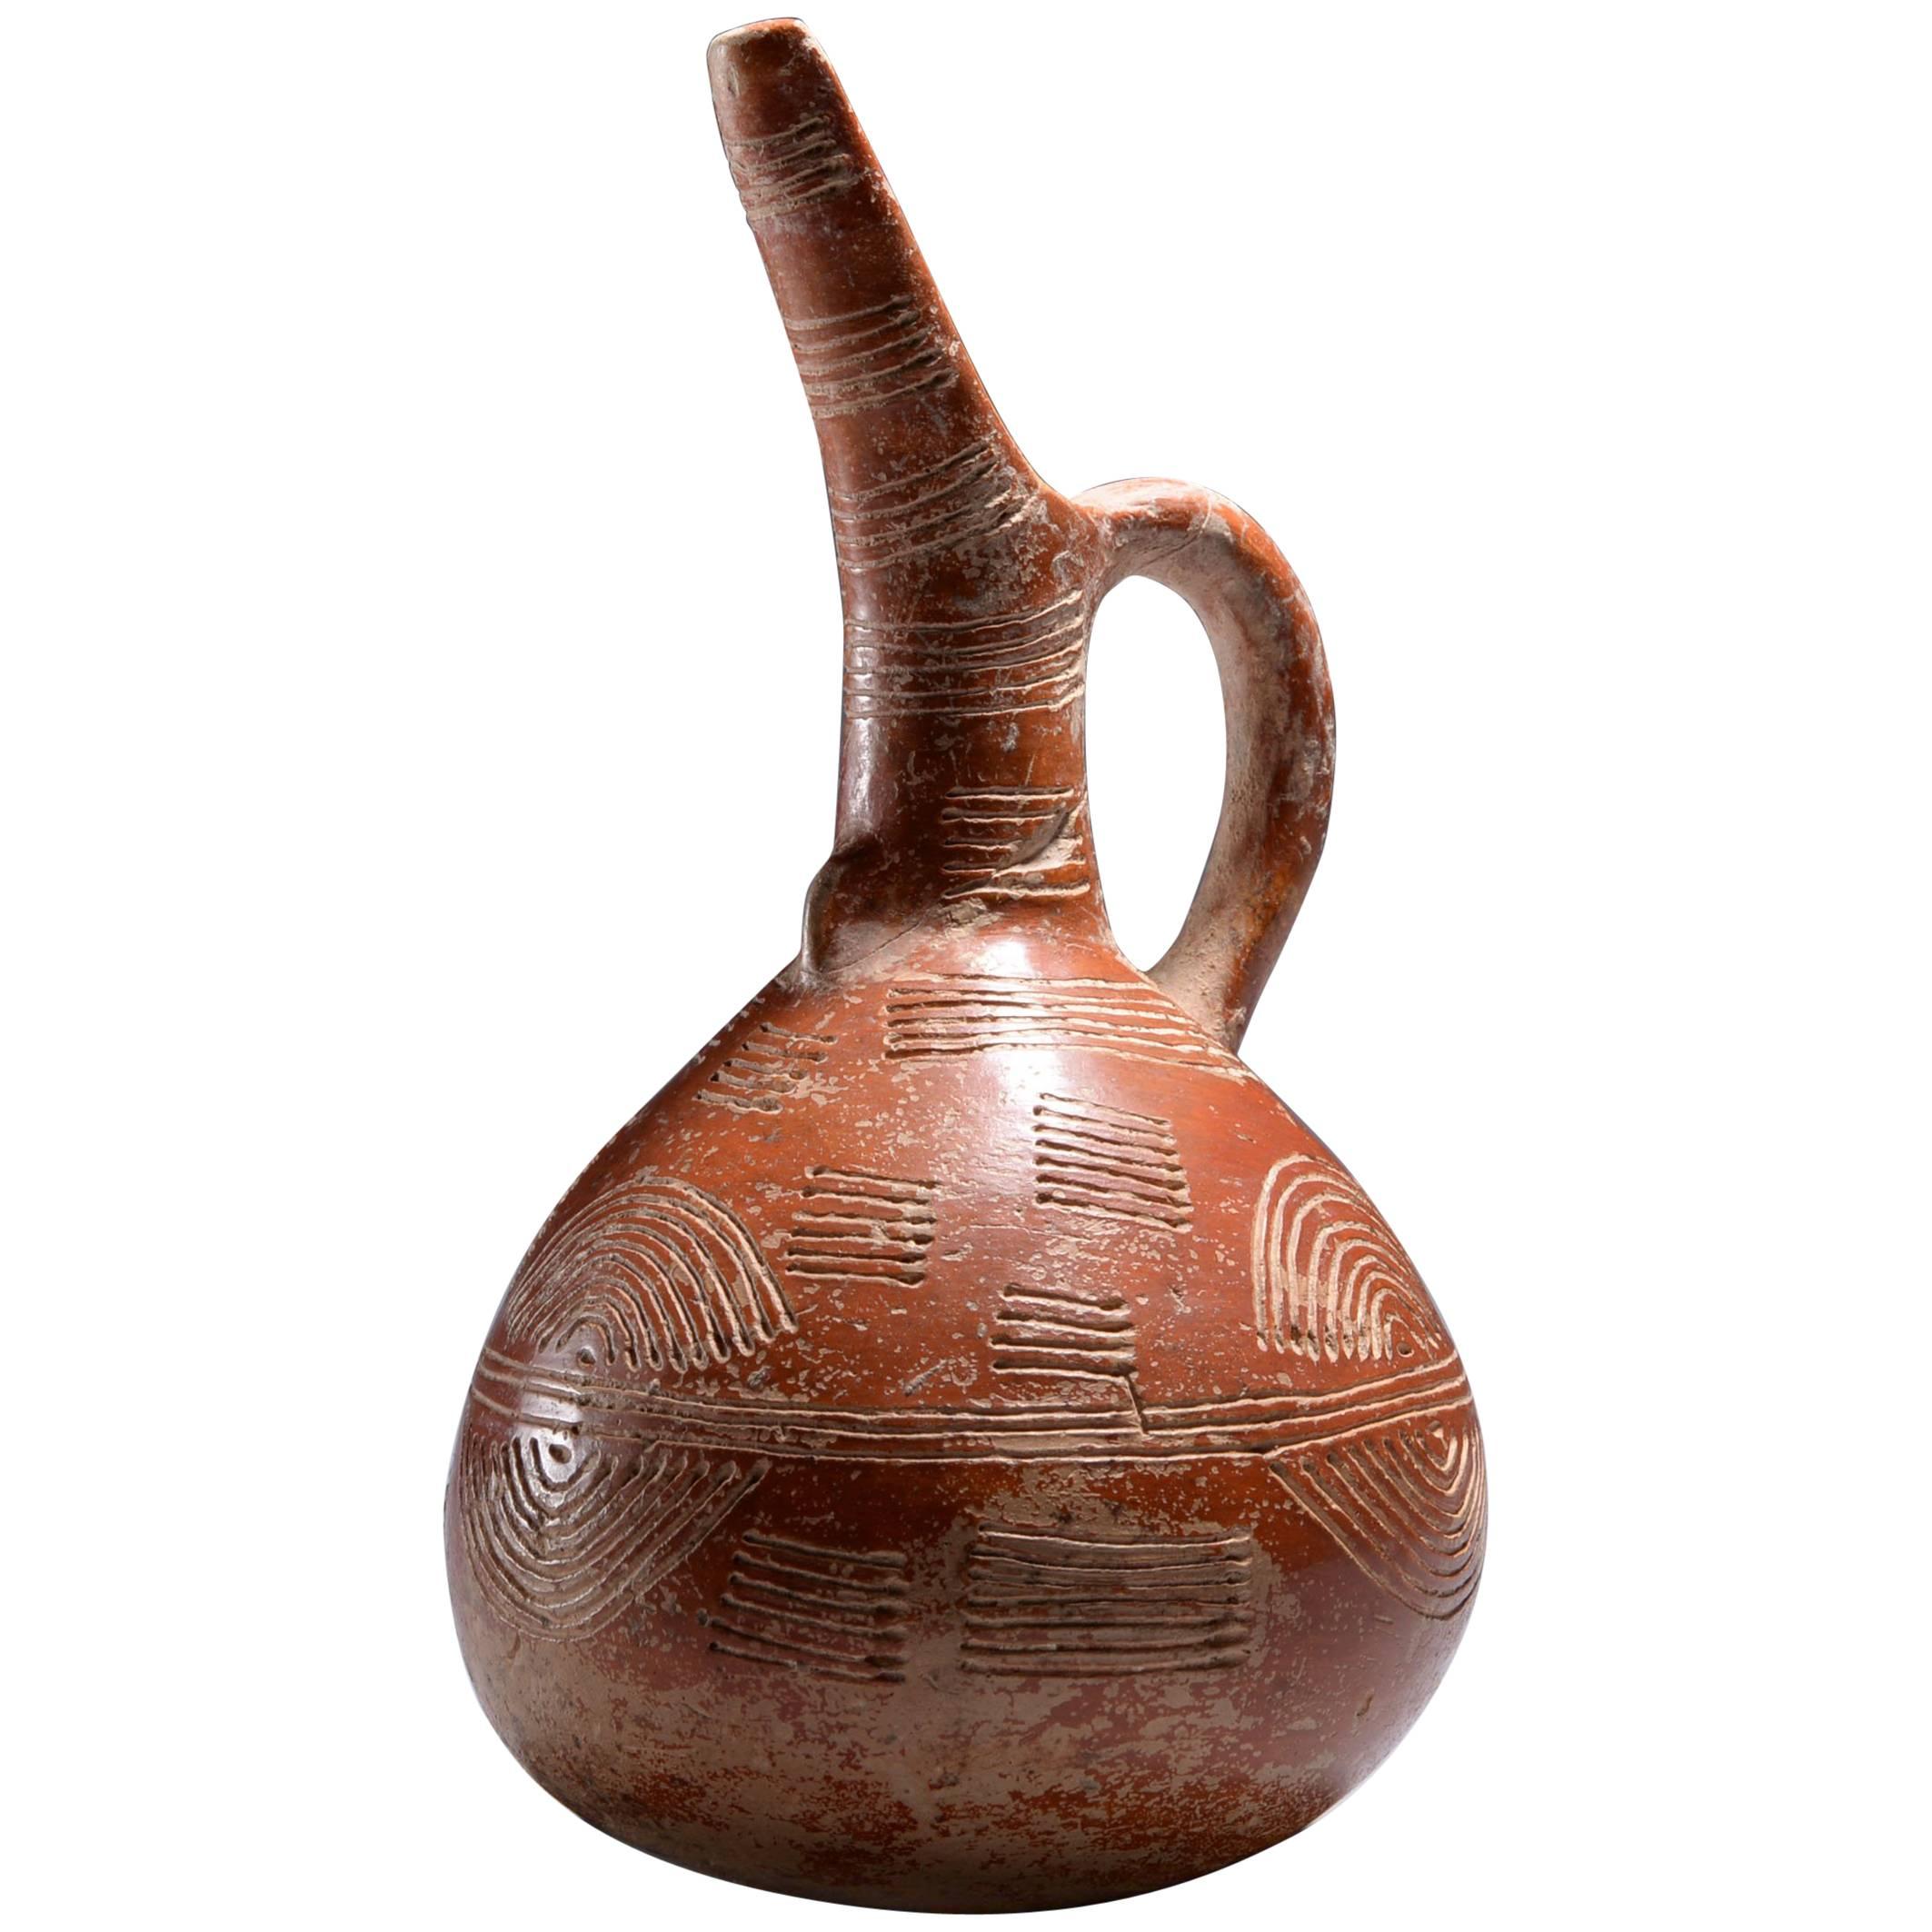 Cypriot Early Bronze Age Red Polished Ware Beaked Jug, 2300 BC